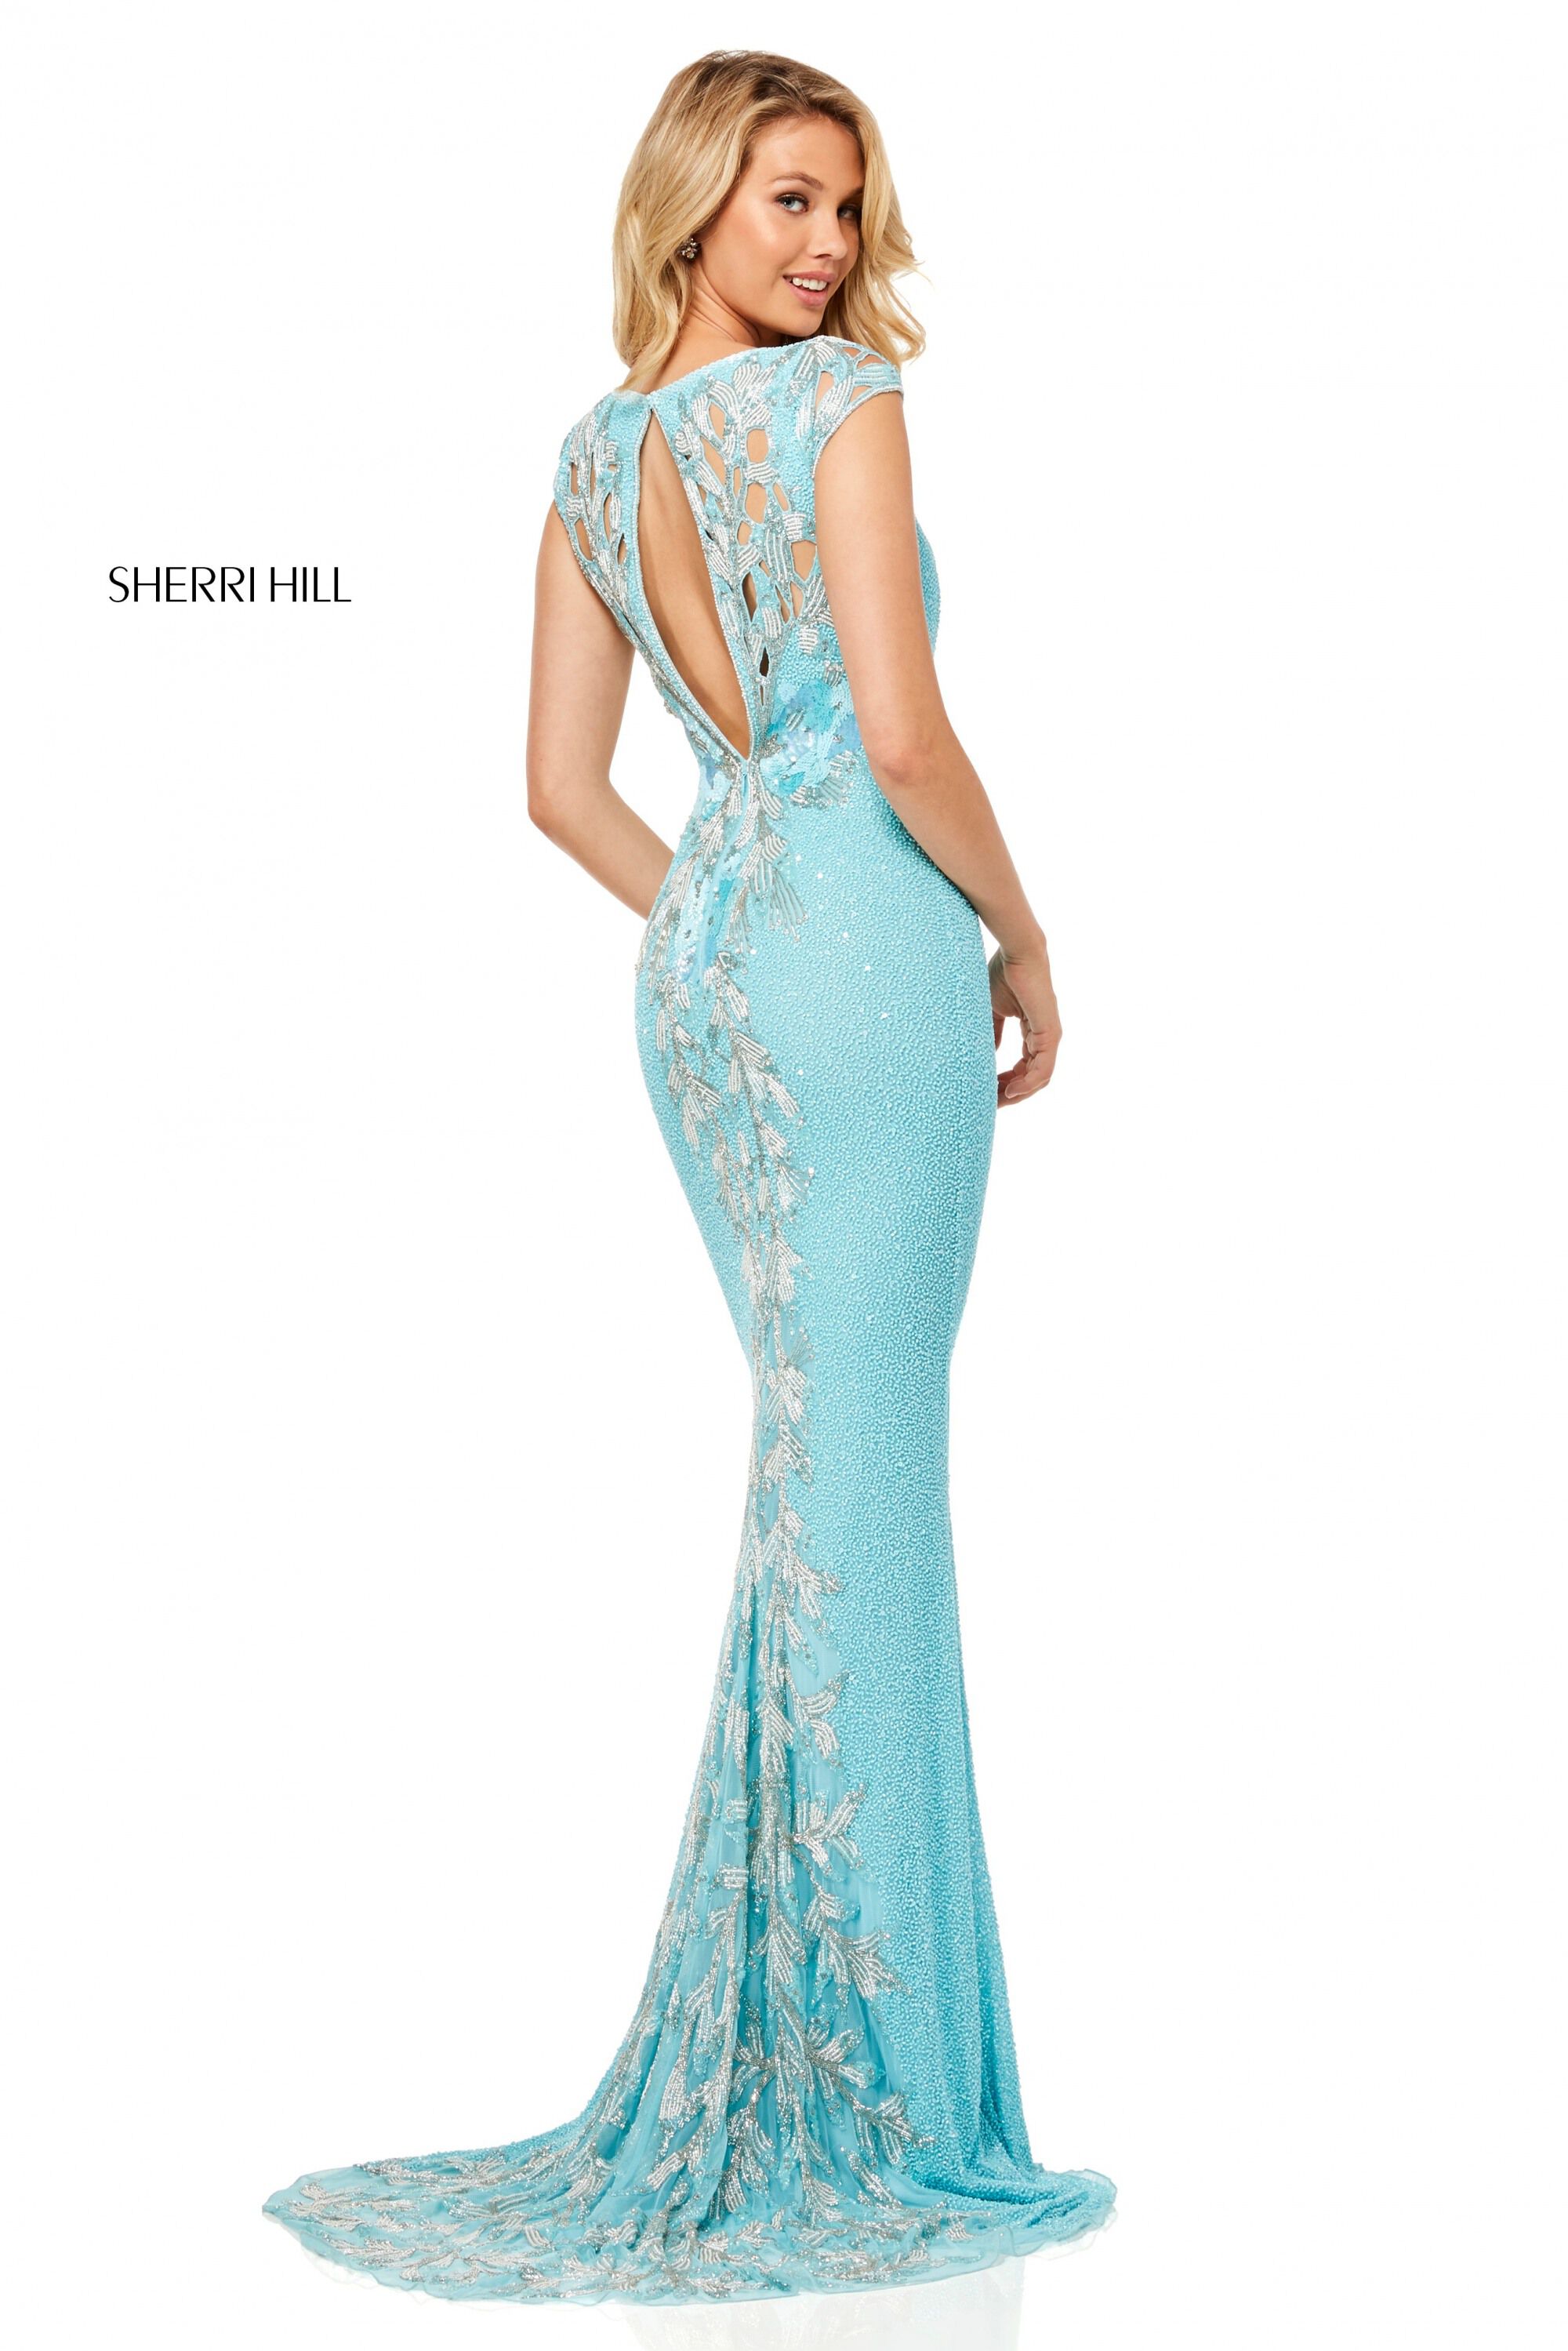 style № 52451 designed by SherriHill